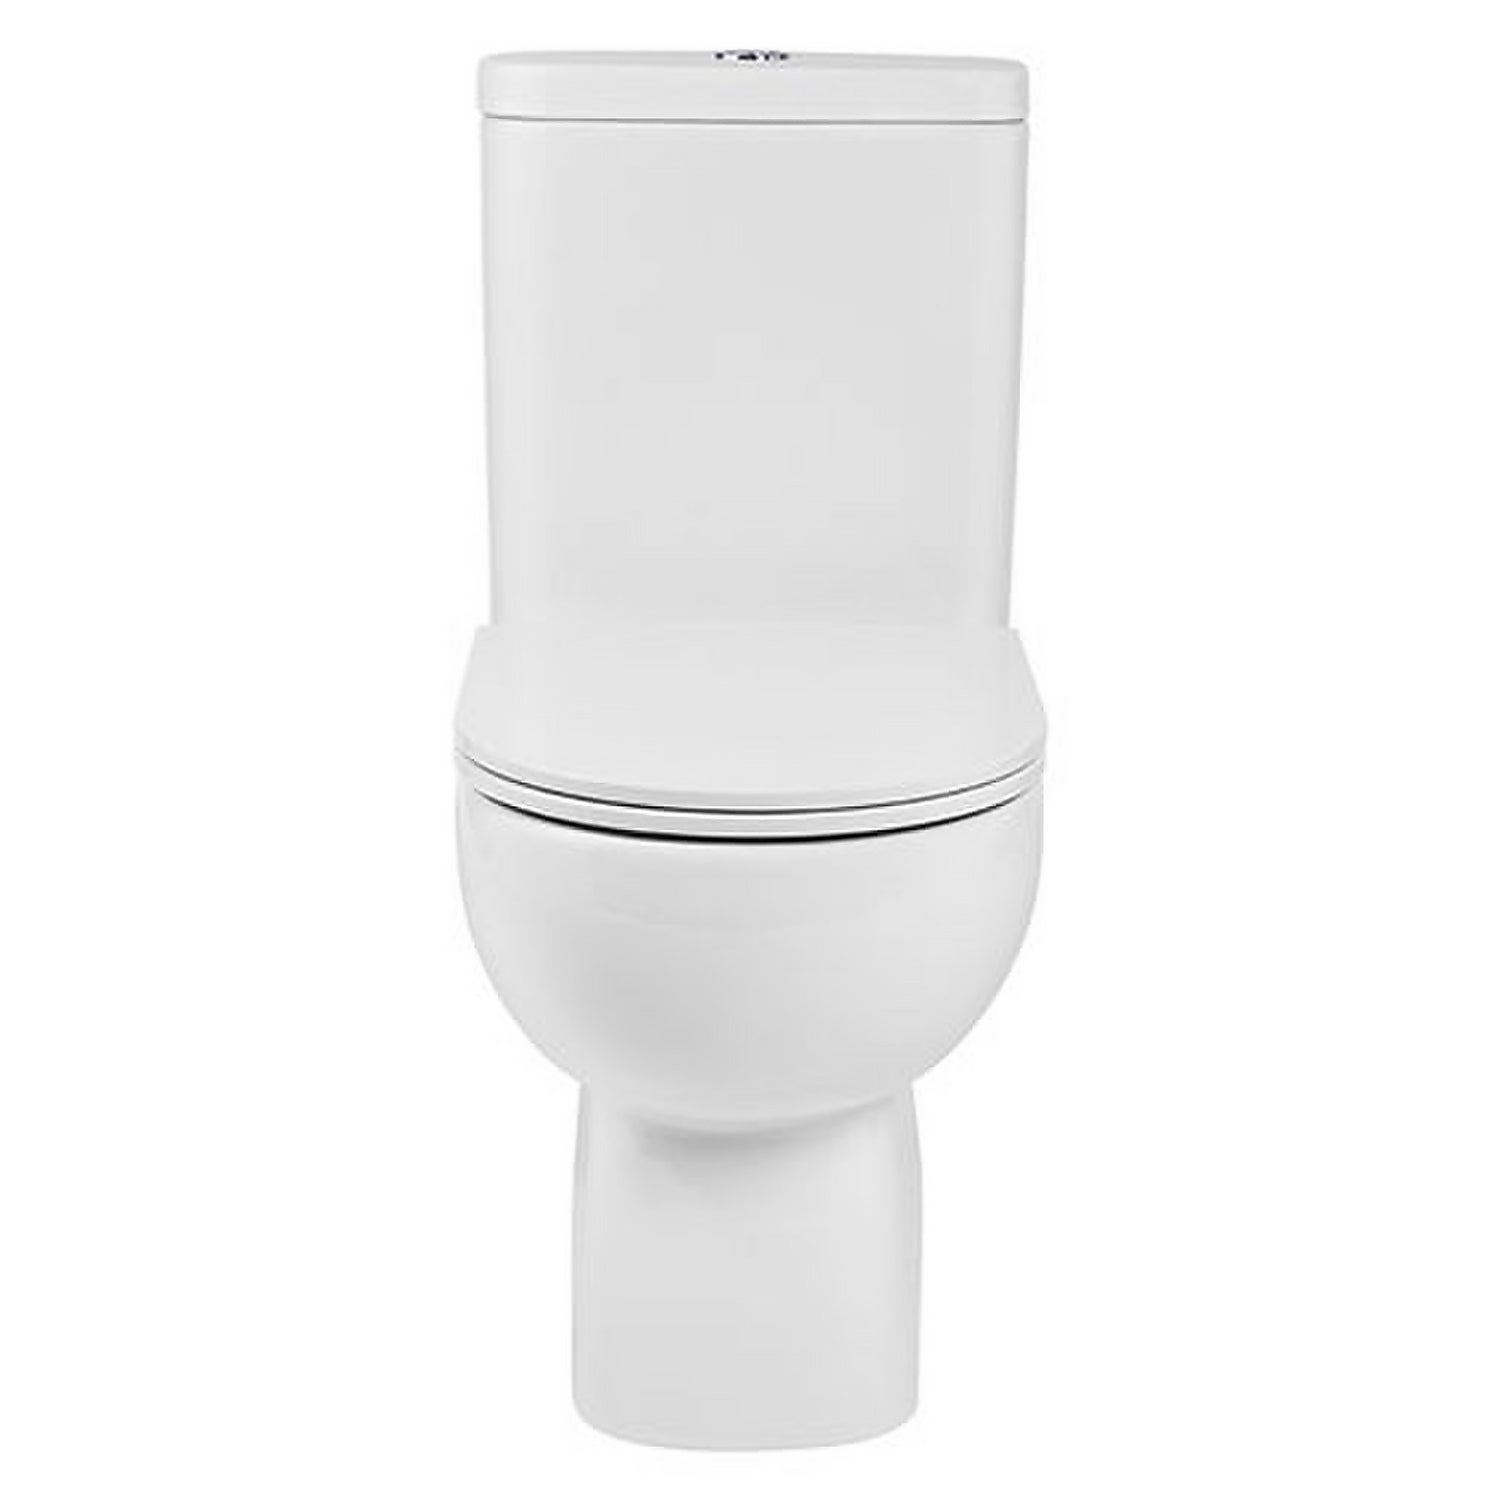 Newton Back To Wall Close Coupled Toilet (including seat)